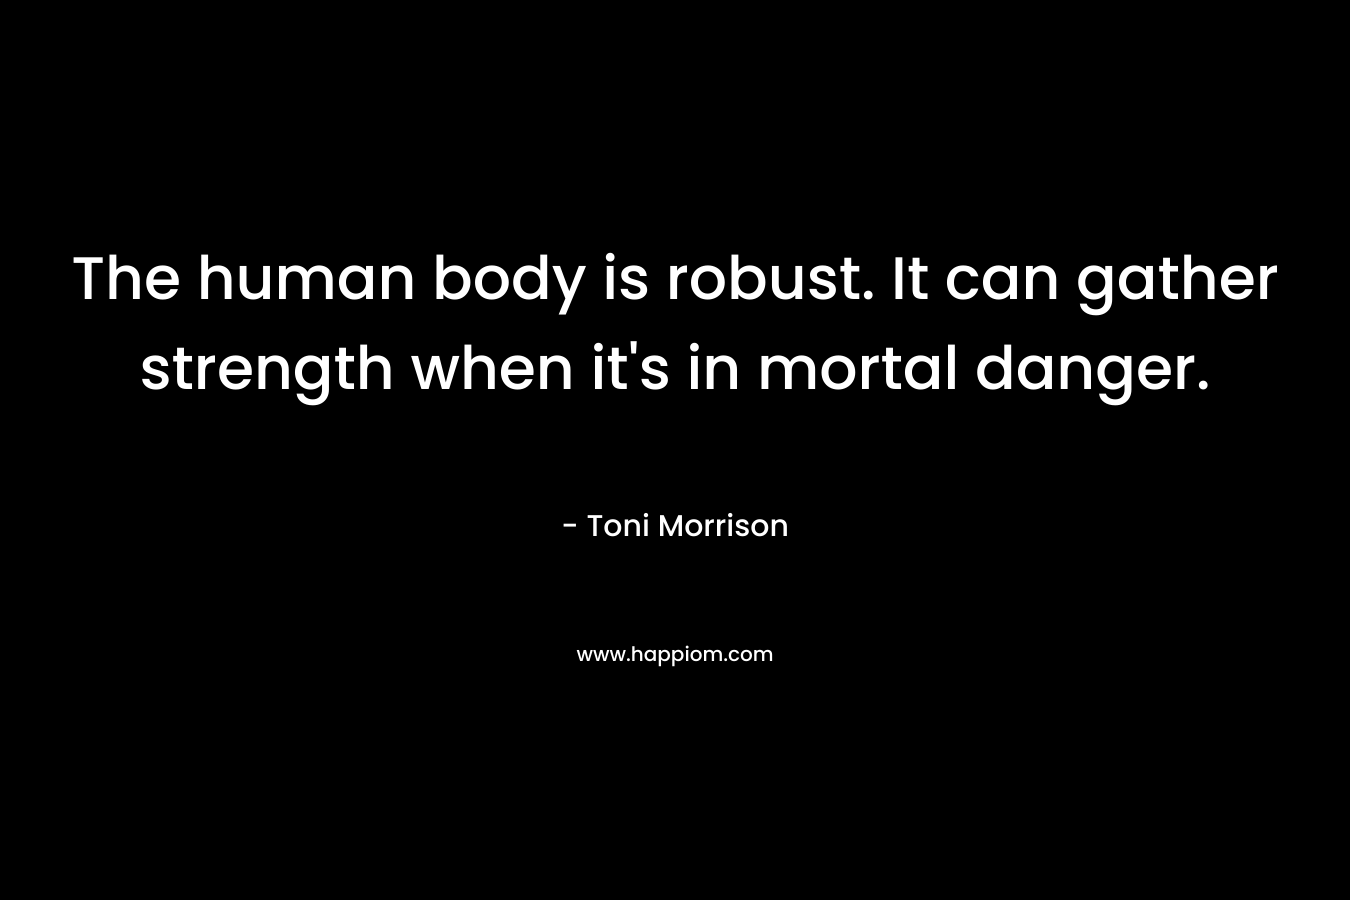 The human body is robust. It can gather strength when it’s in mortal danger. – Toni Morrison